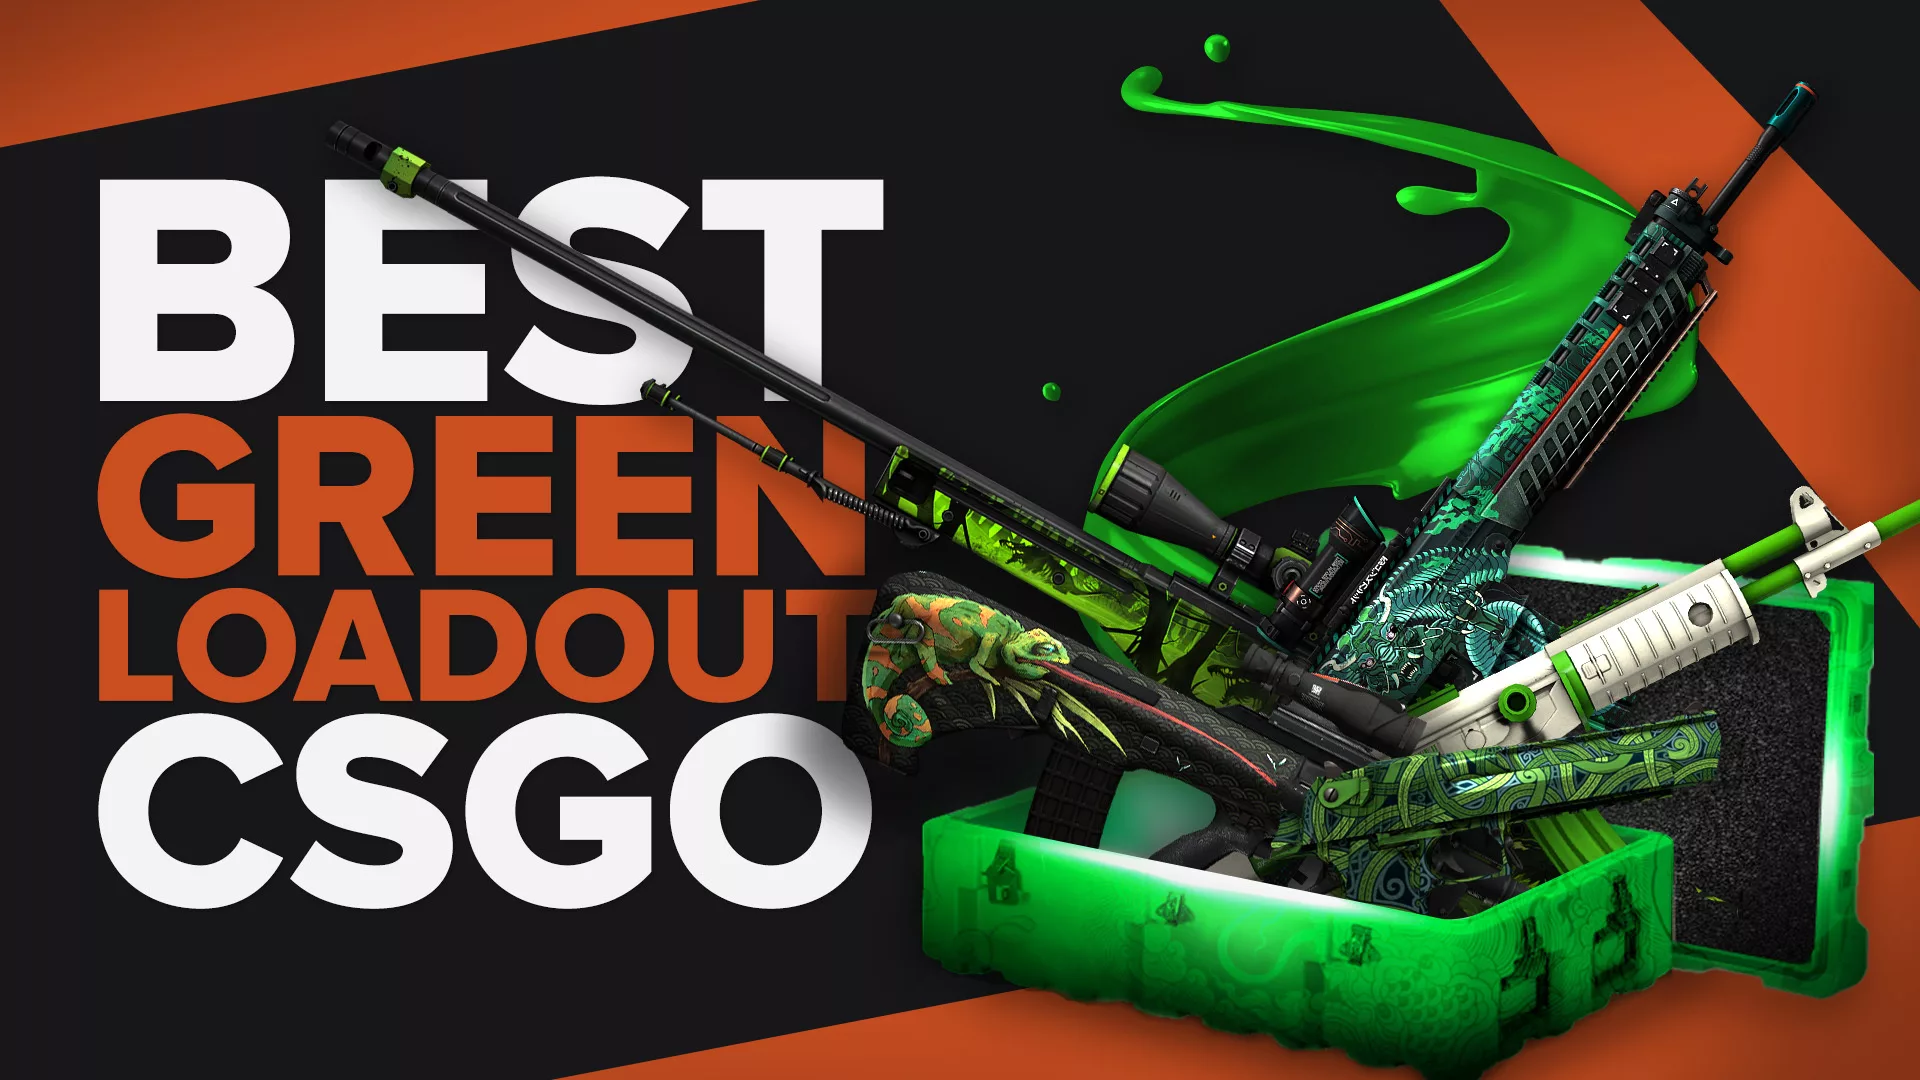 The Best Green Loadout For CSGO